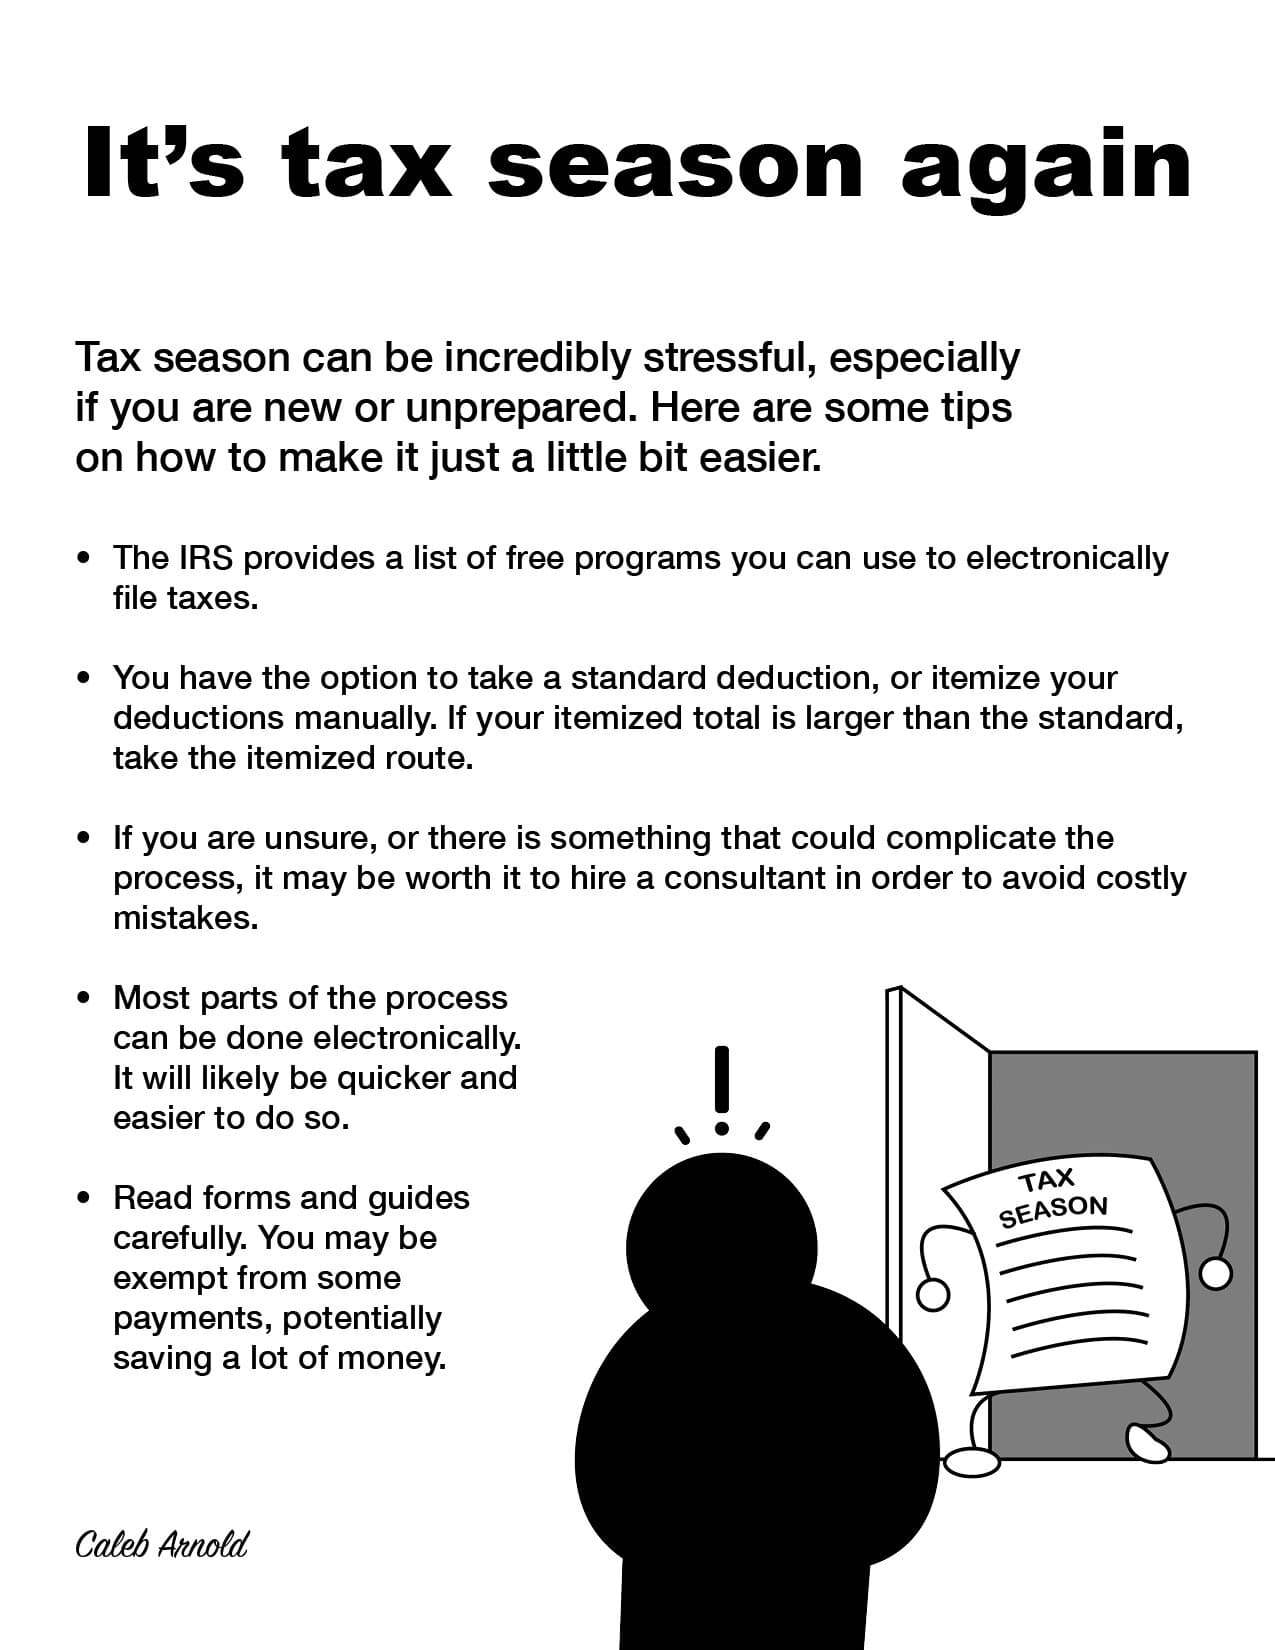 Tax season is looming around the corner. Here are a few tips to help you through it.Source: fool.com